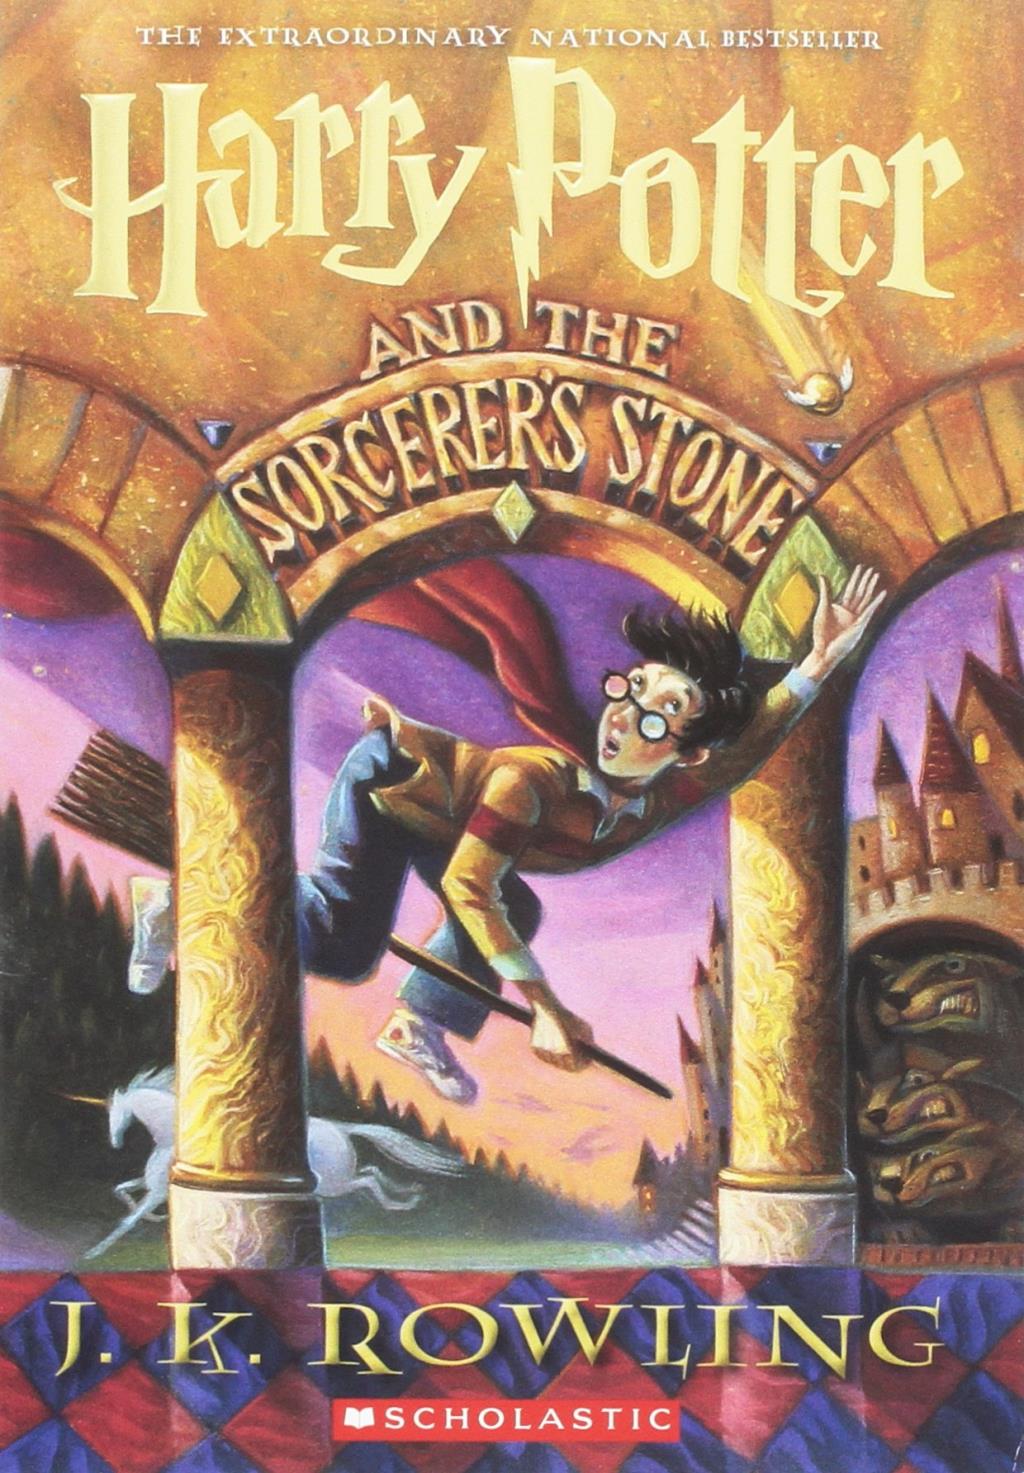 harry potter and the sorcerer's stone book cover